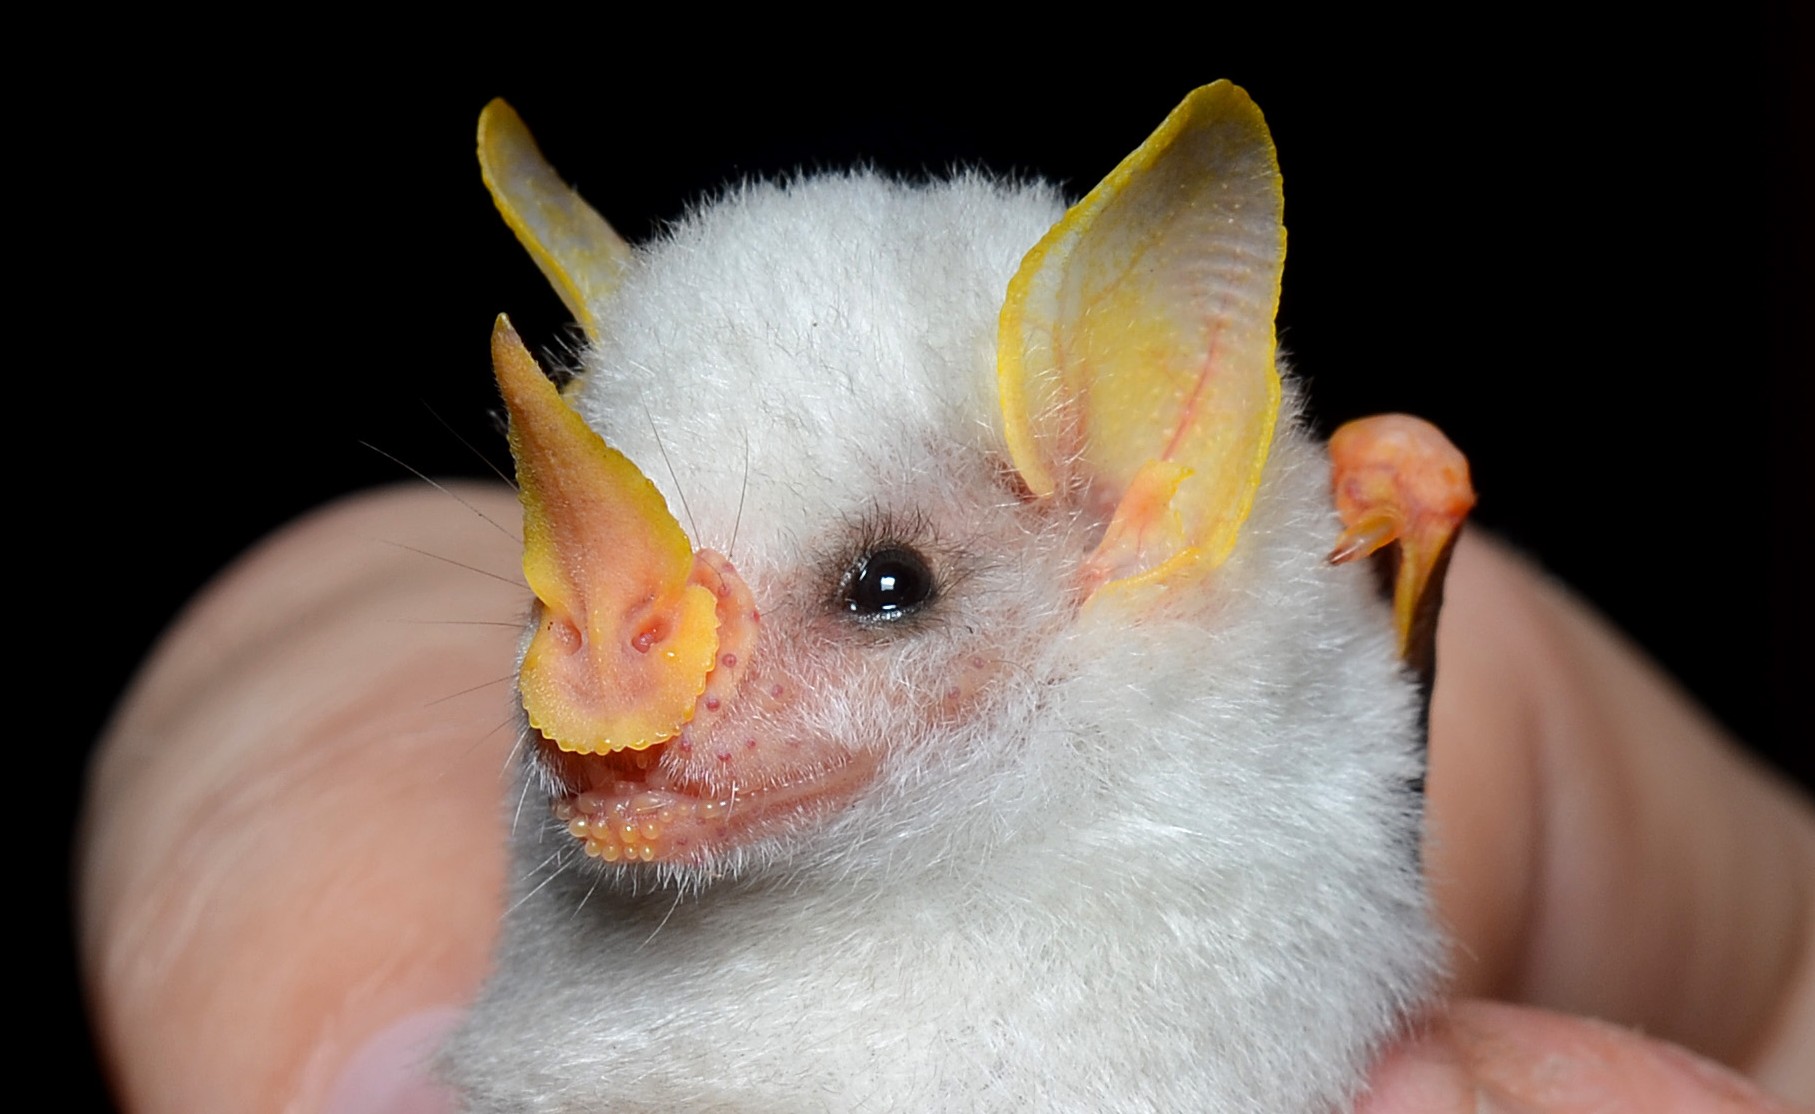 Ectophylla alba By Geoff Gallice from Gainesville, FL, USA (Honduran tent bat  Uploaded by Leyo) [CC-BY-2.0 (http://creativecommons.org/licenses/by/2.0)], via Wikimedia Commons